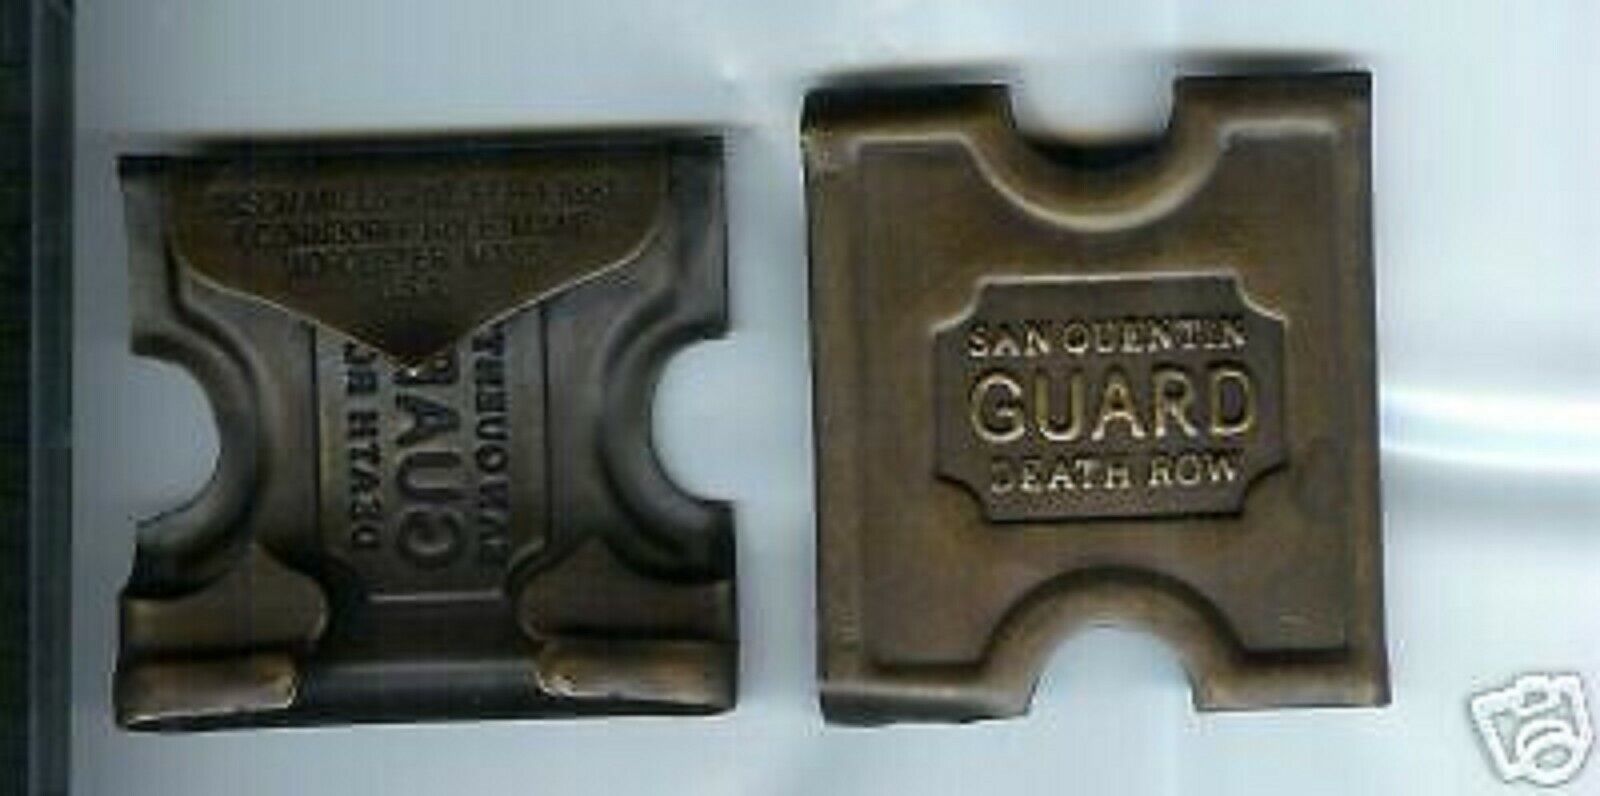 Primary image for ANSON MILLS SAN QUENTIN GUARD DEATH ROW BELT BUCKLE